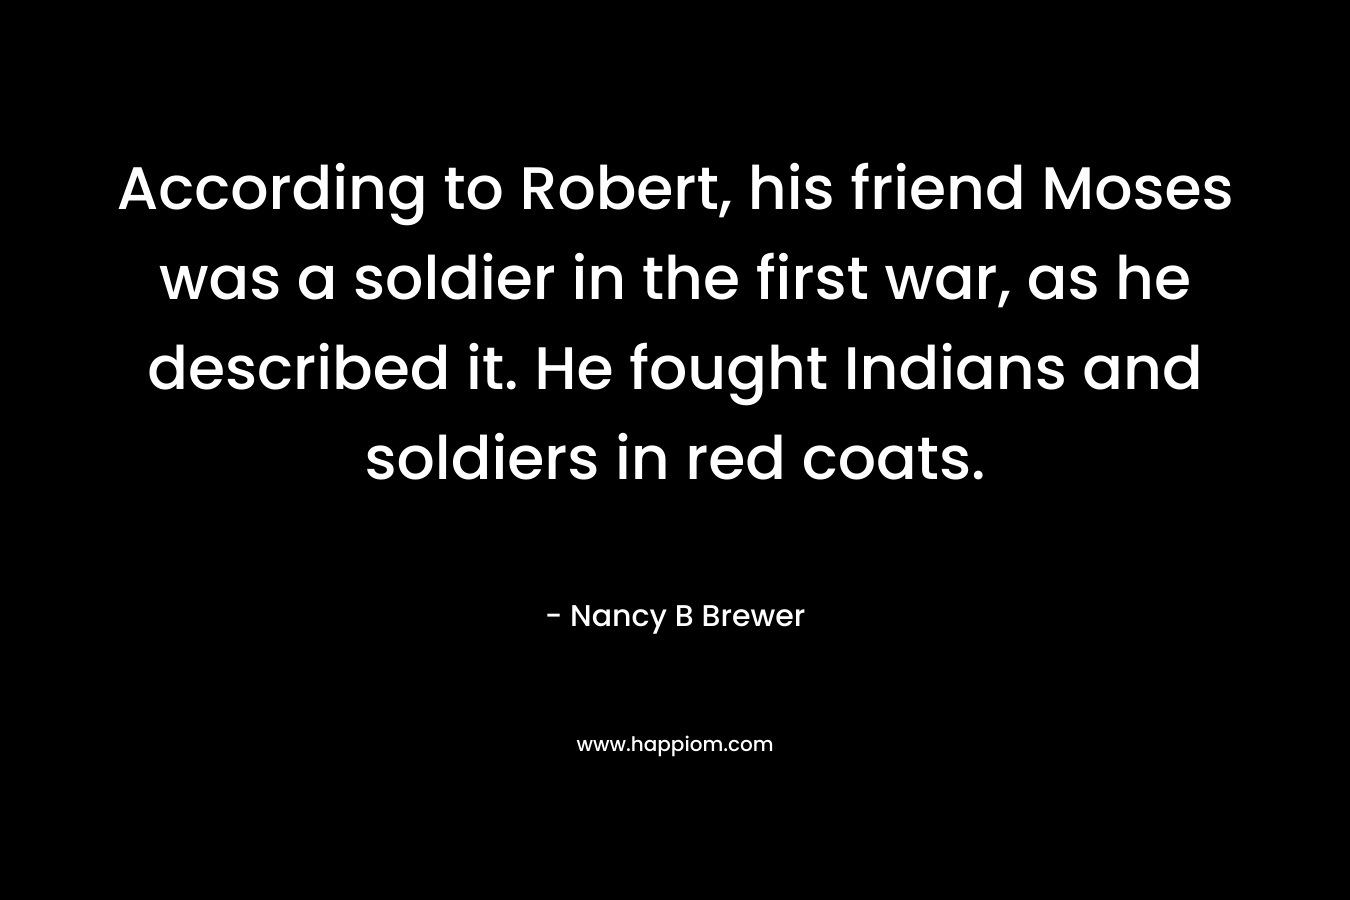 According to Robert, his friend Moses was a soldier in the first war, as he described it. He fought Indians and soldiers in red coats. – Nancy B Brewer